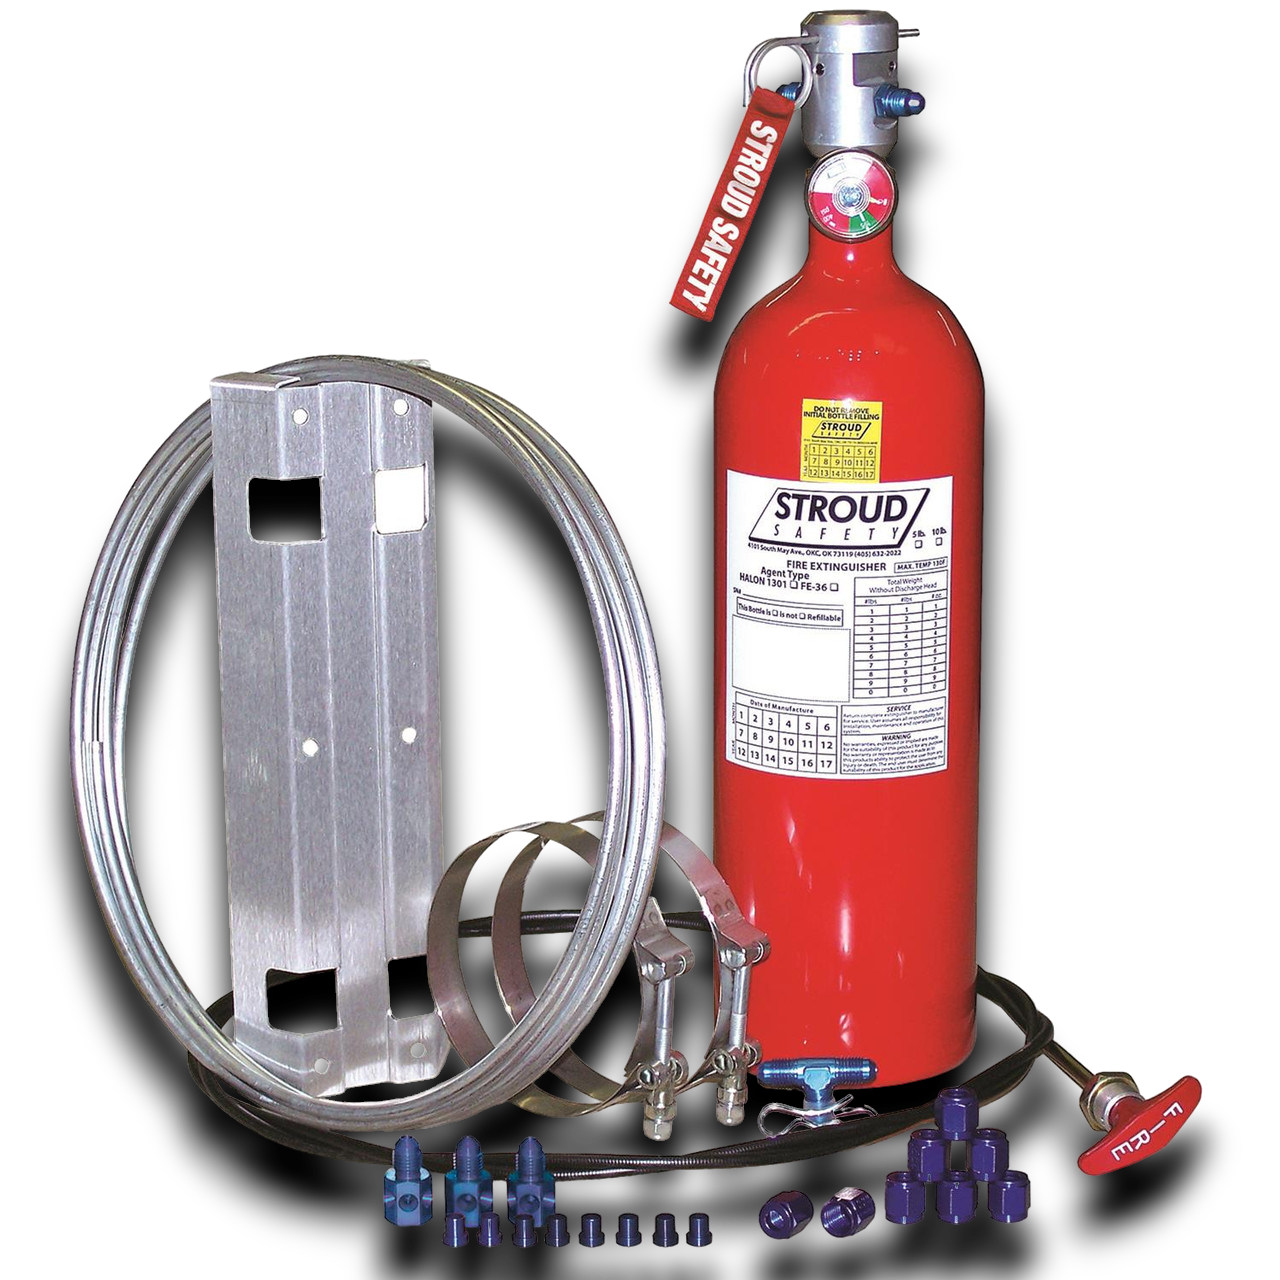 Stroud Novec 1230 Fire Suppression System